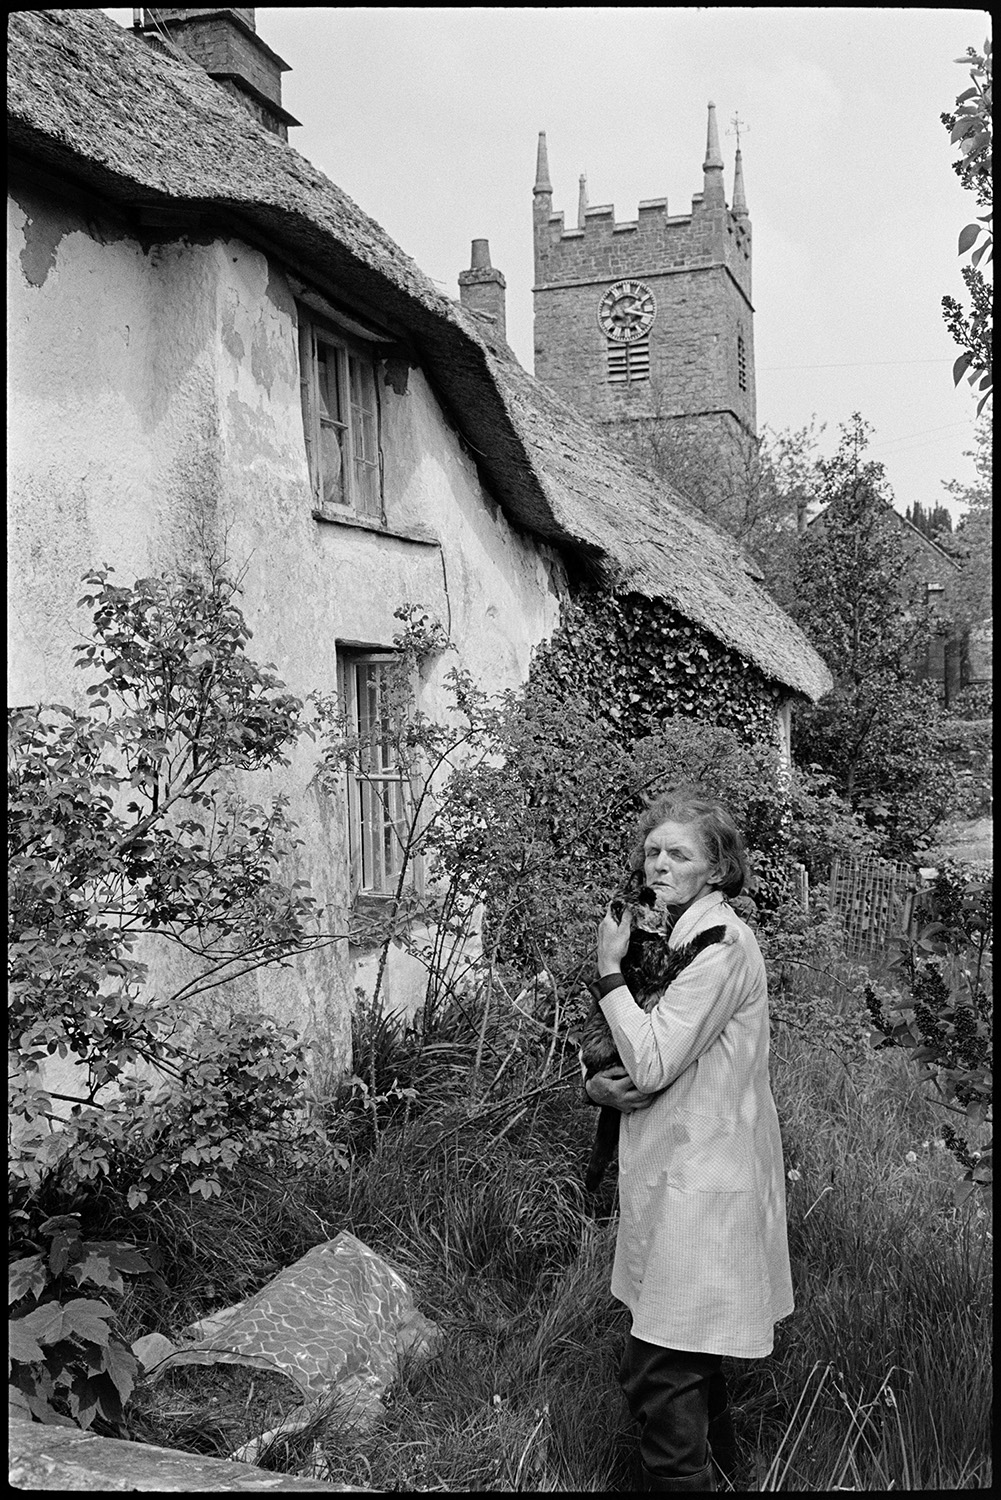 House with porch, people chatting, slate roofed workshop or forge? Church tower. 
[A woman holding a cat stood outside a thatched cottage in Northlew. The church tower can be seen in the background.]